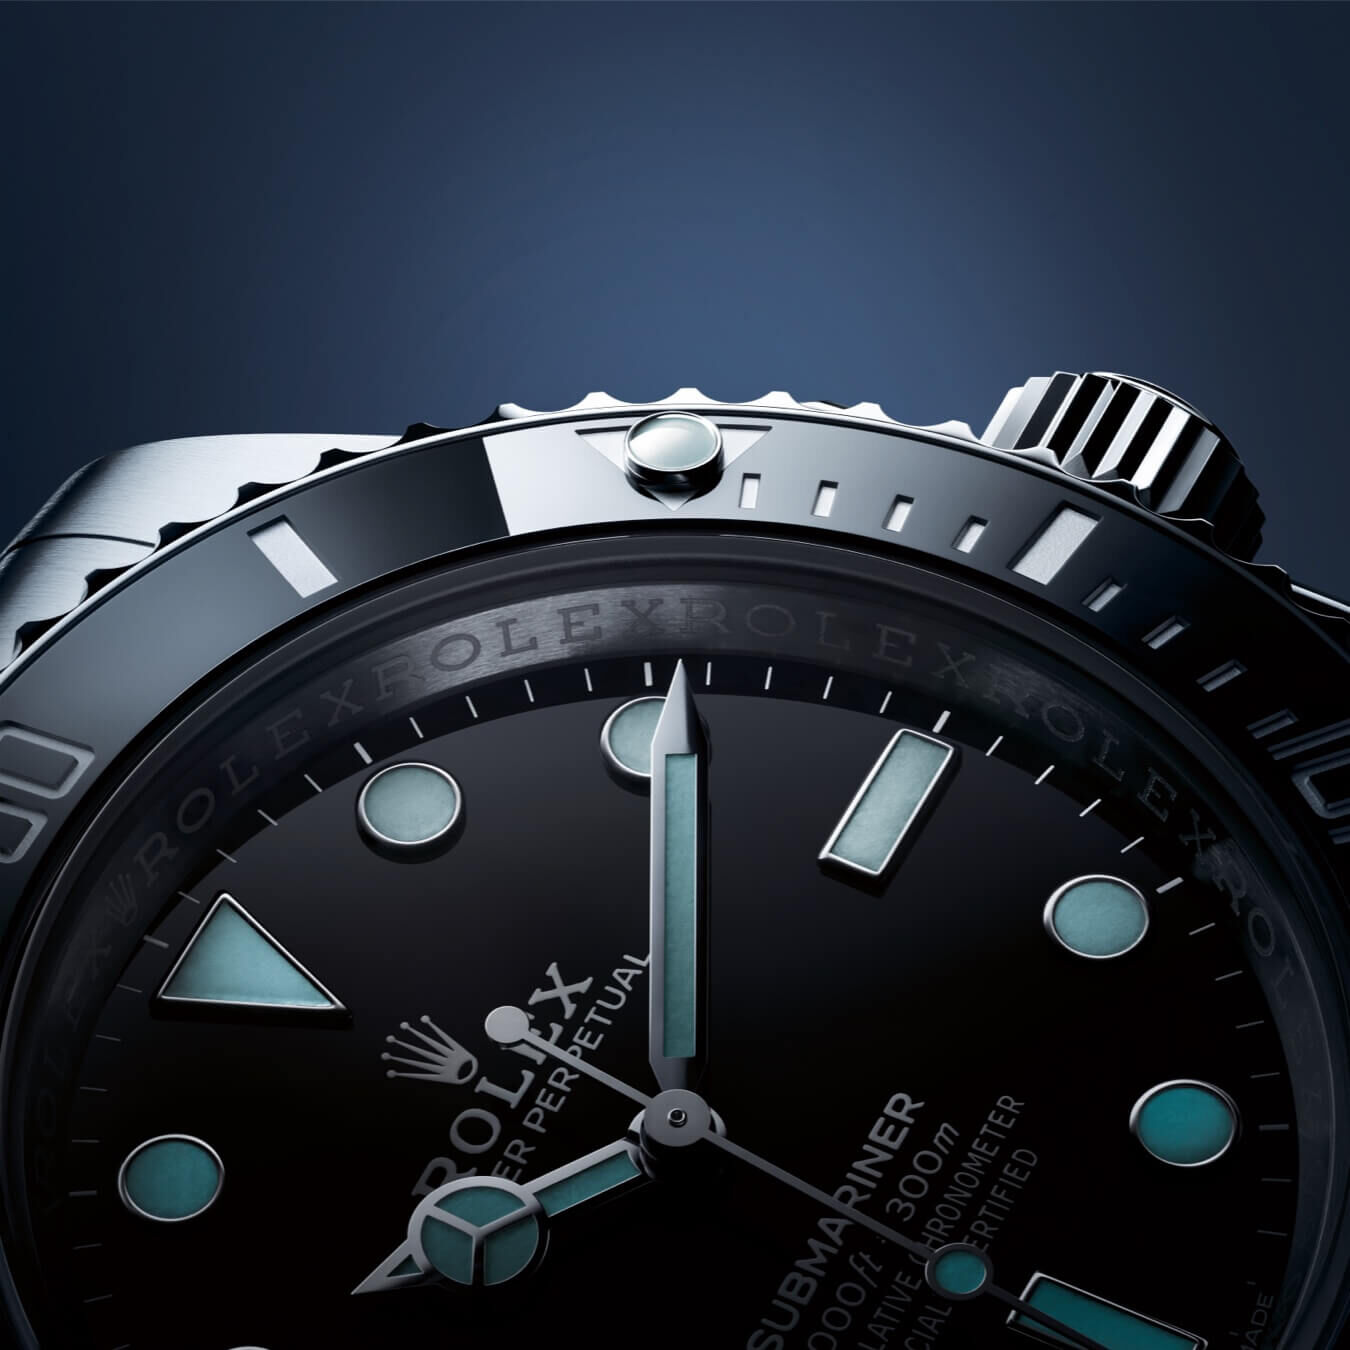 An Oyster Perpetual Submariner watch face with a black dial and insert in low light with slightly glowing luminescent hour markers and hands